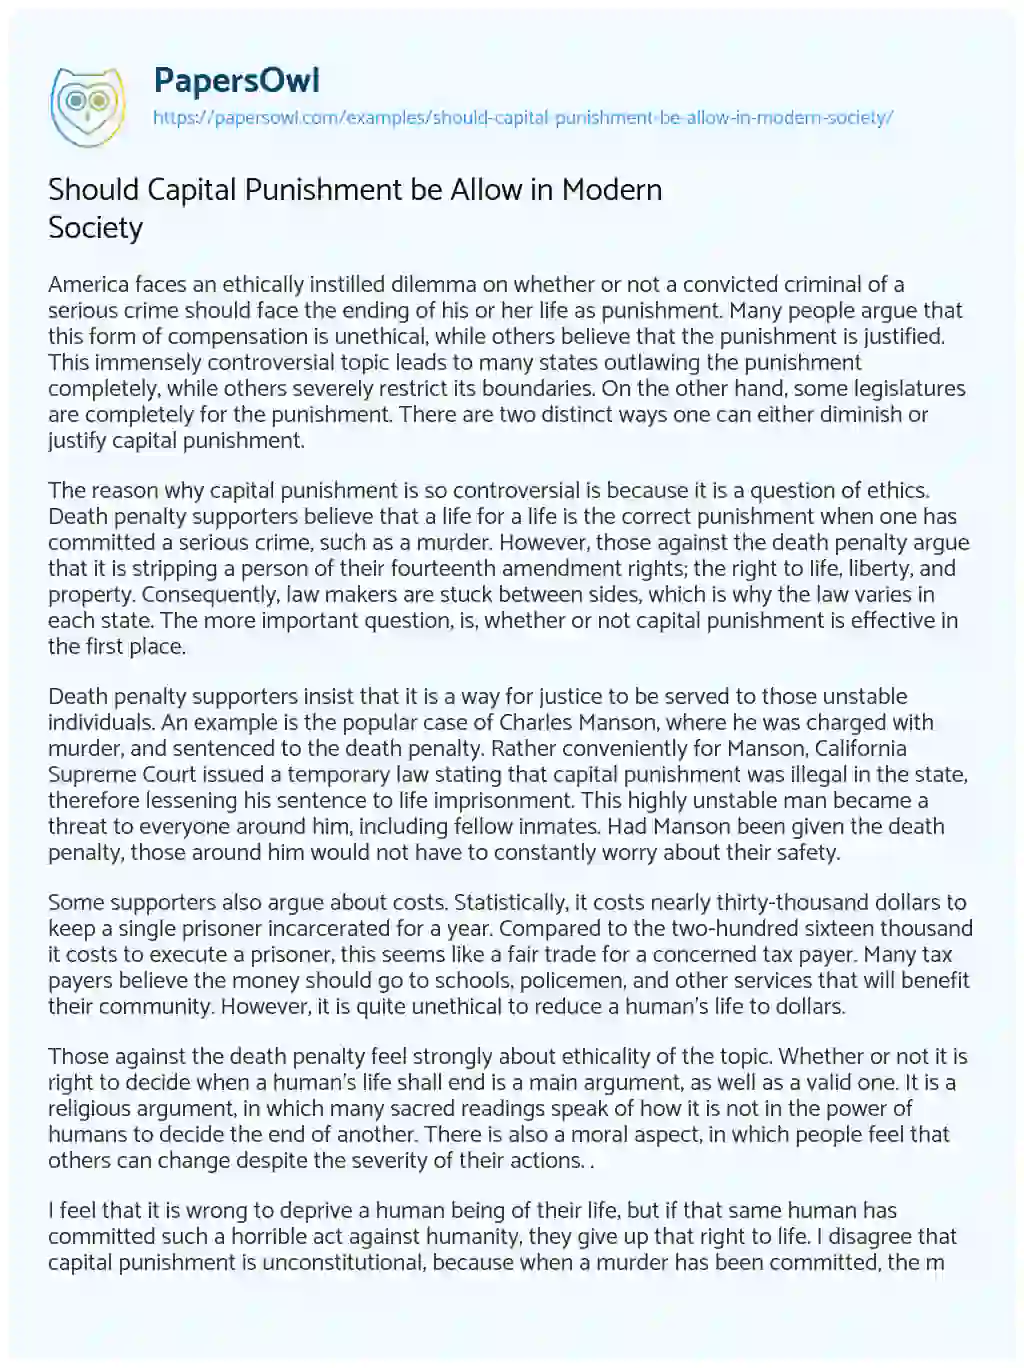 Should Capital Punishment be Allow in Modern Society essay